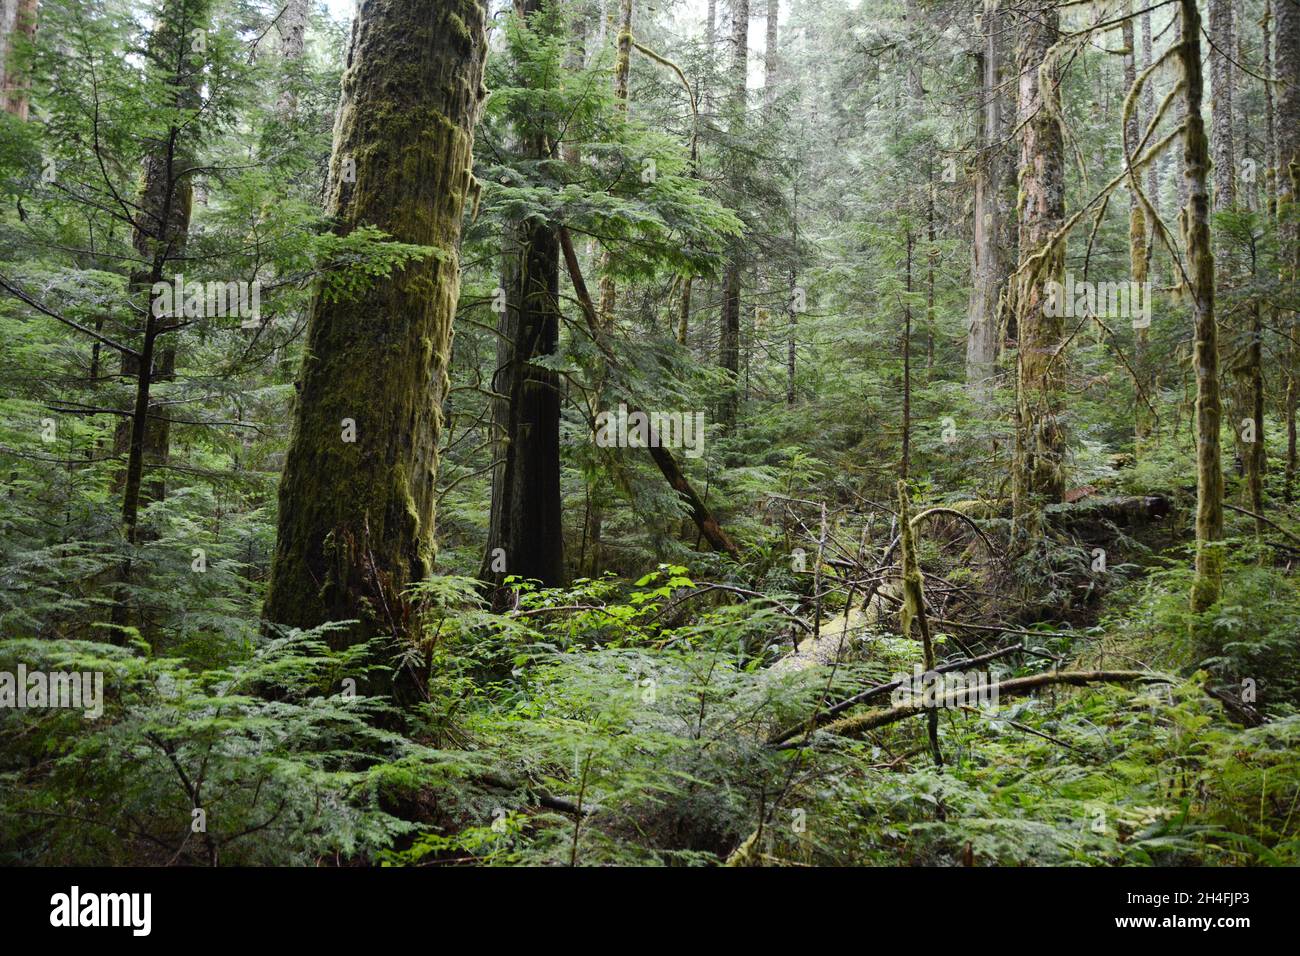 Conifer trees in a pristine old growth forest on the Sunshine Coast hiking Trail, near Powell River, British Columbia, Canada. Stock Photo